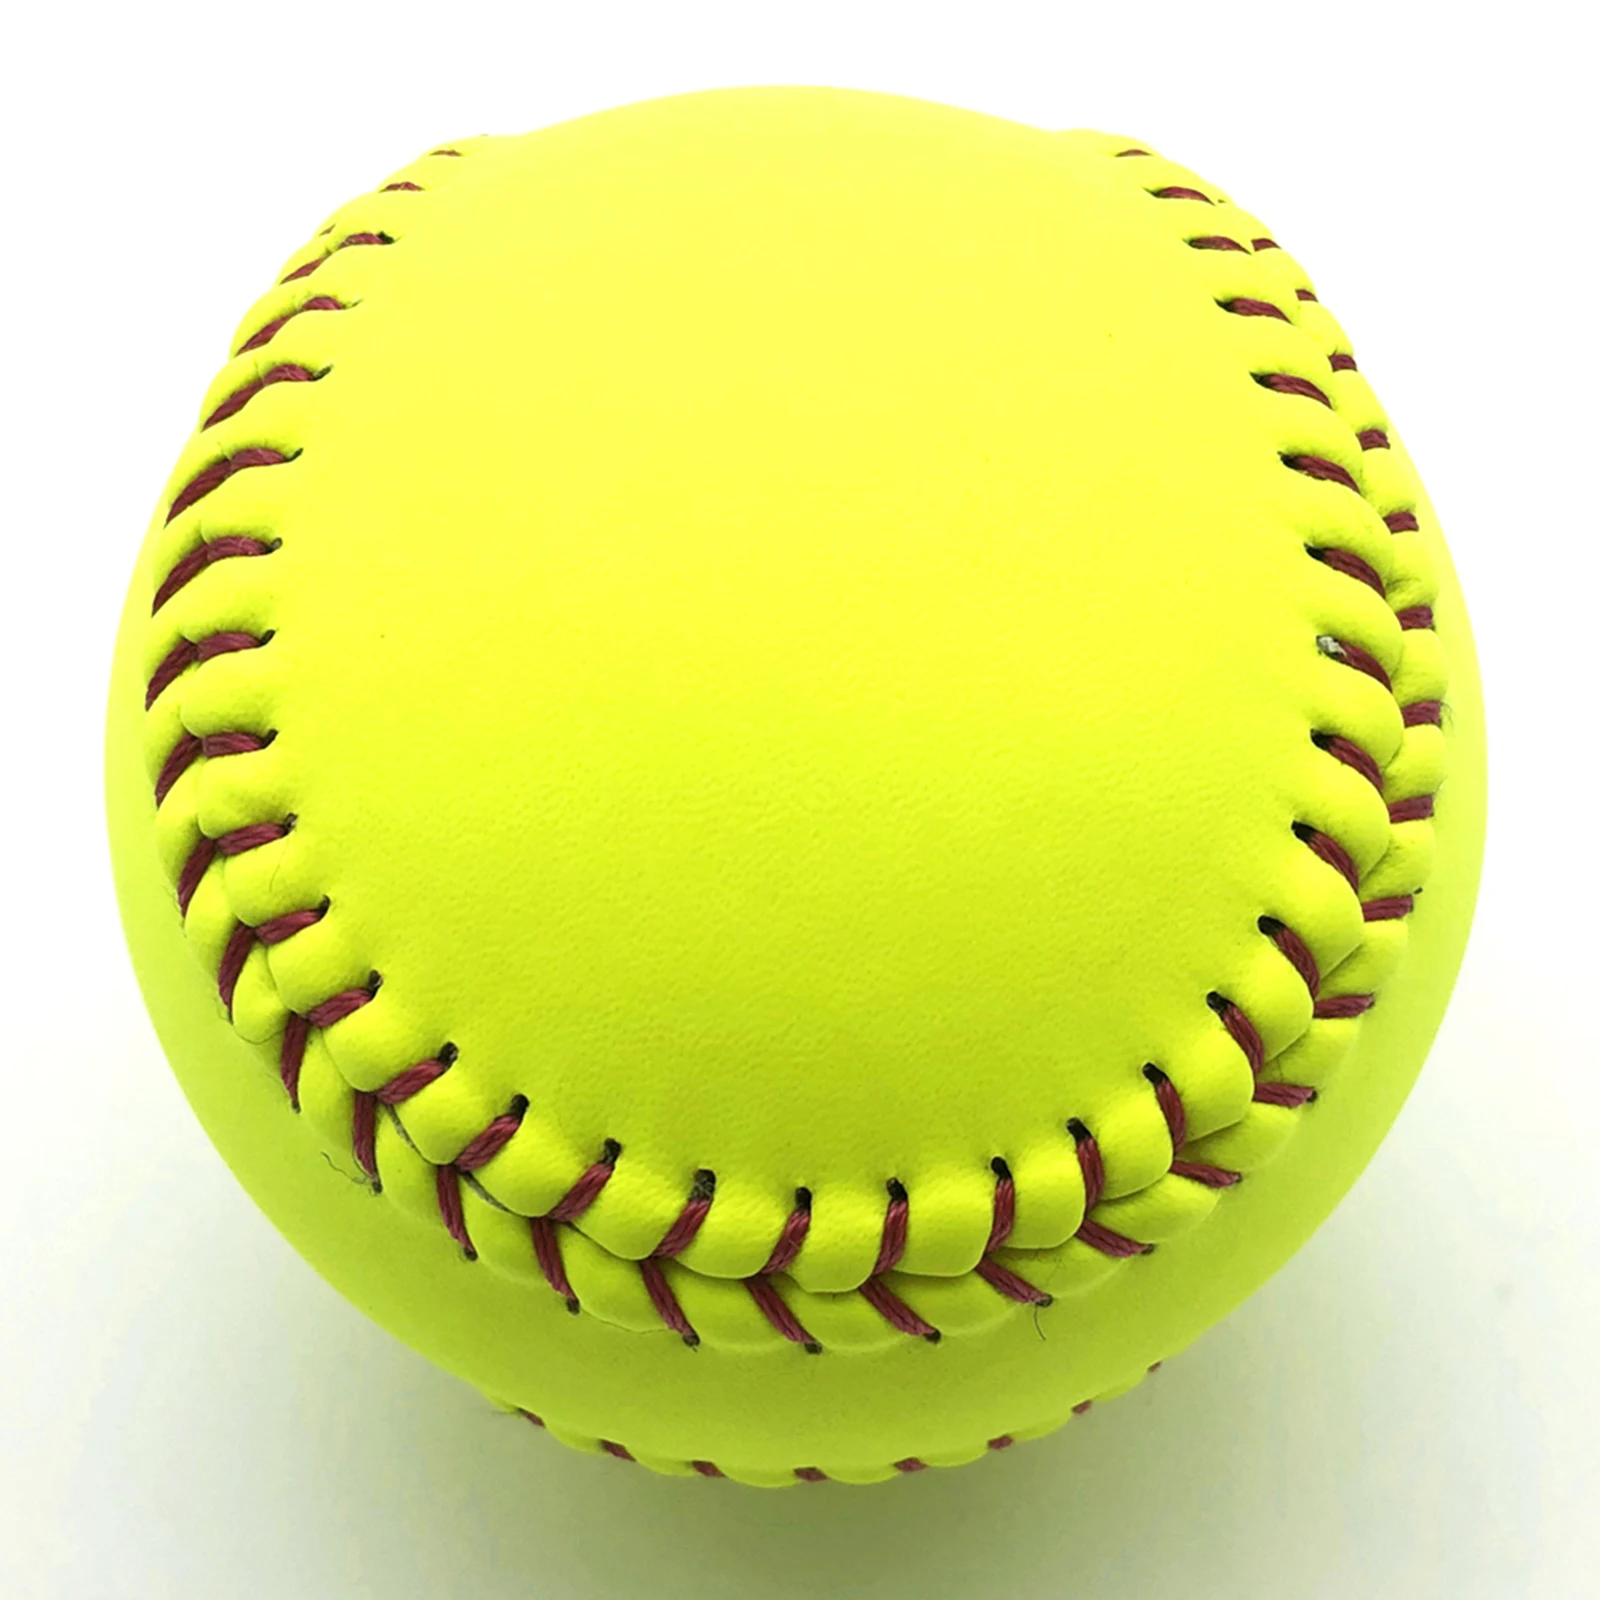 

Training Ball Softball Cork Official Size Weight Sports Practice Unmarked Training Ball 12-Inch Accuracy Brand New